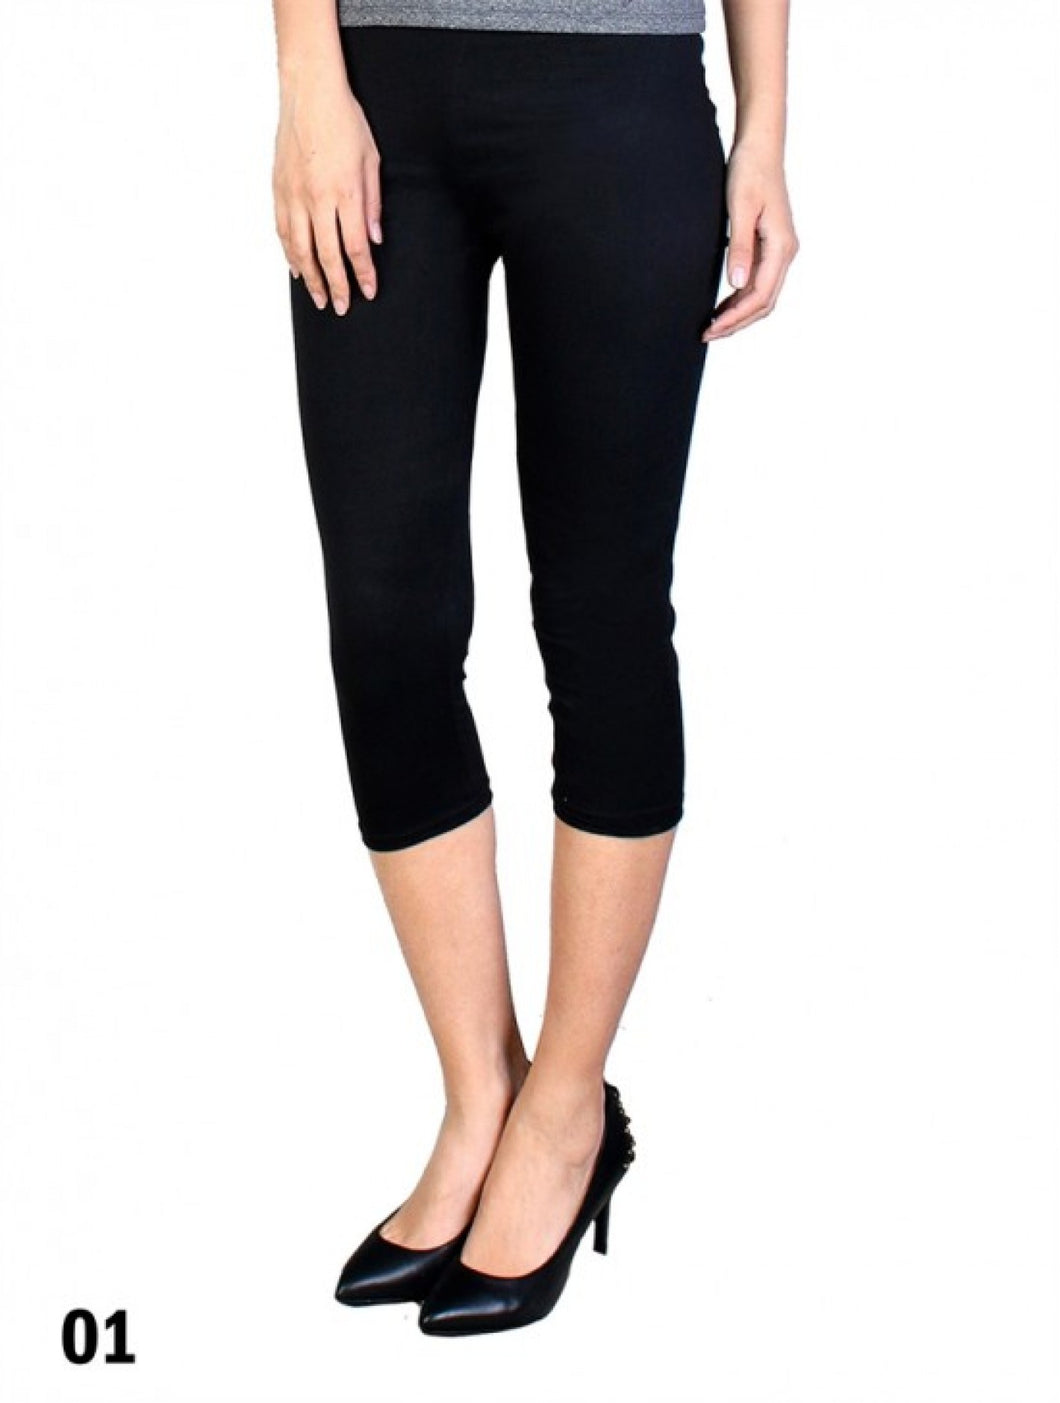 Stretchy Capris Leggings (One Size)